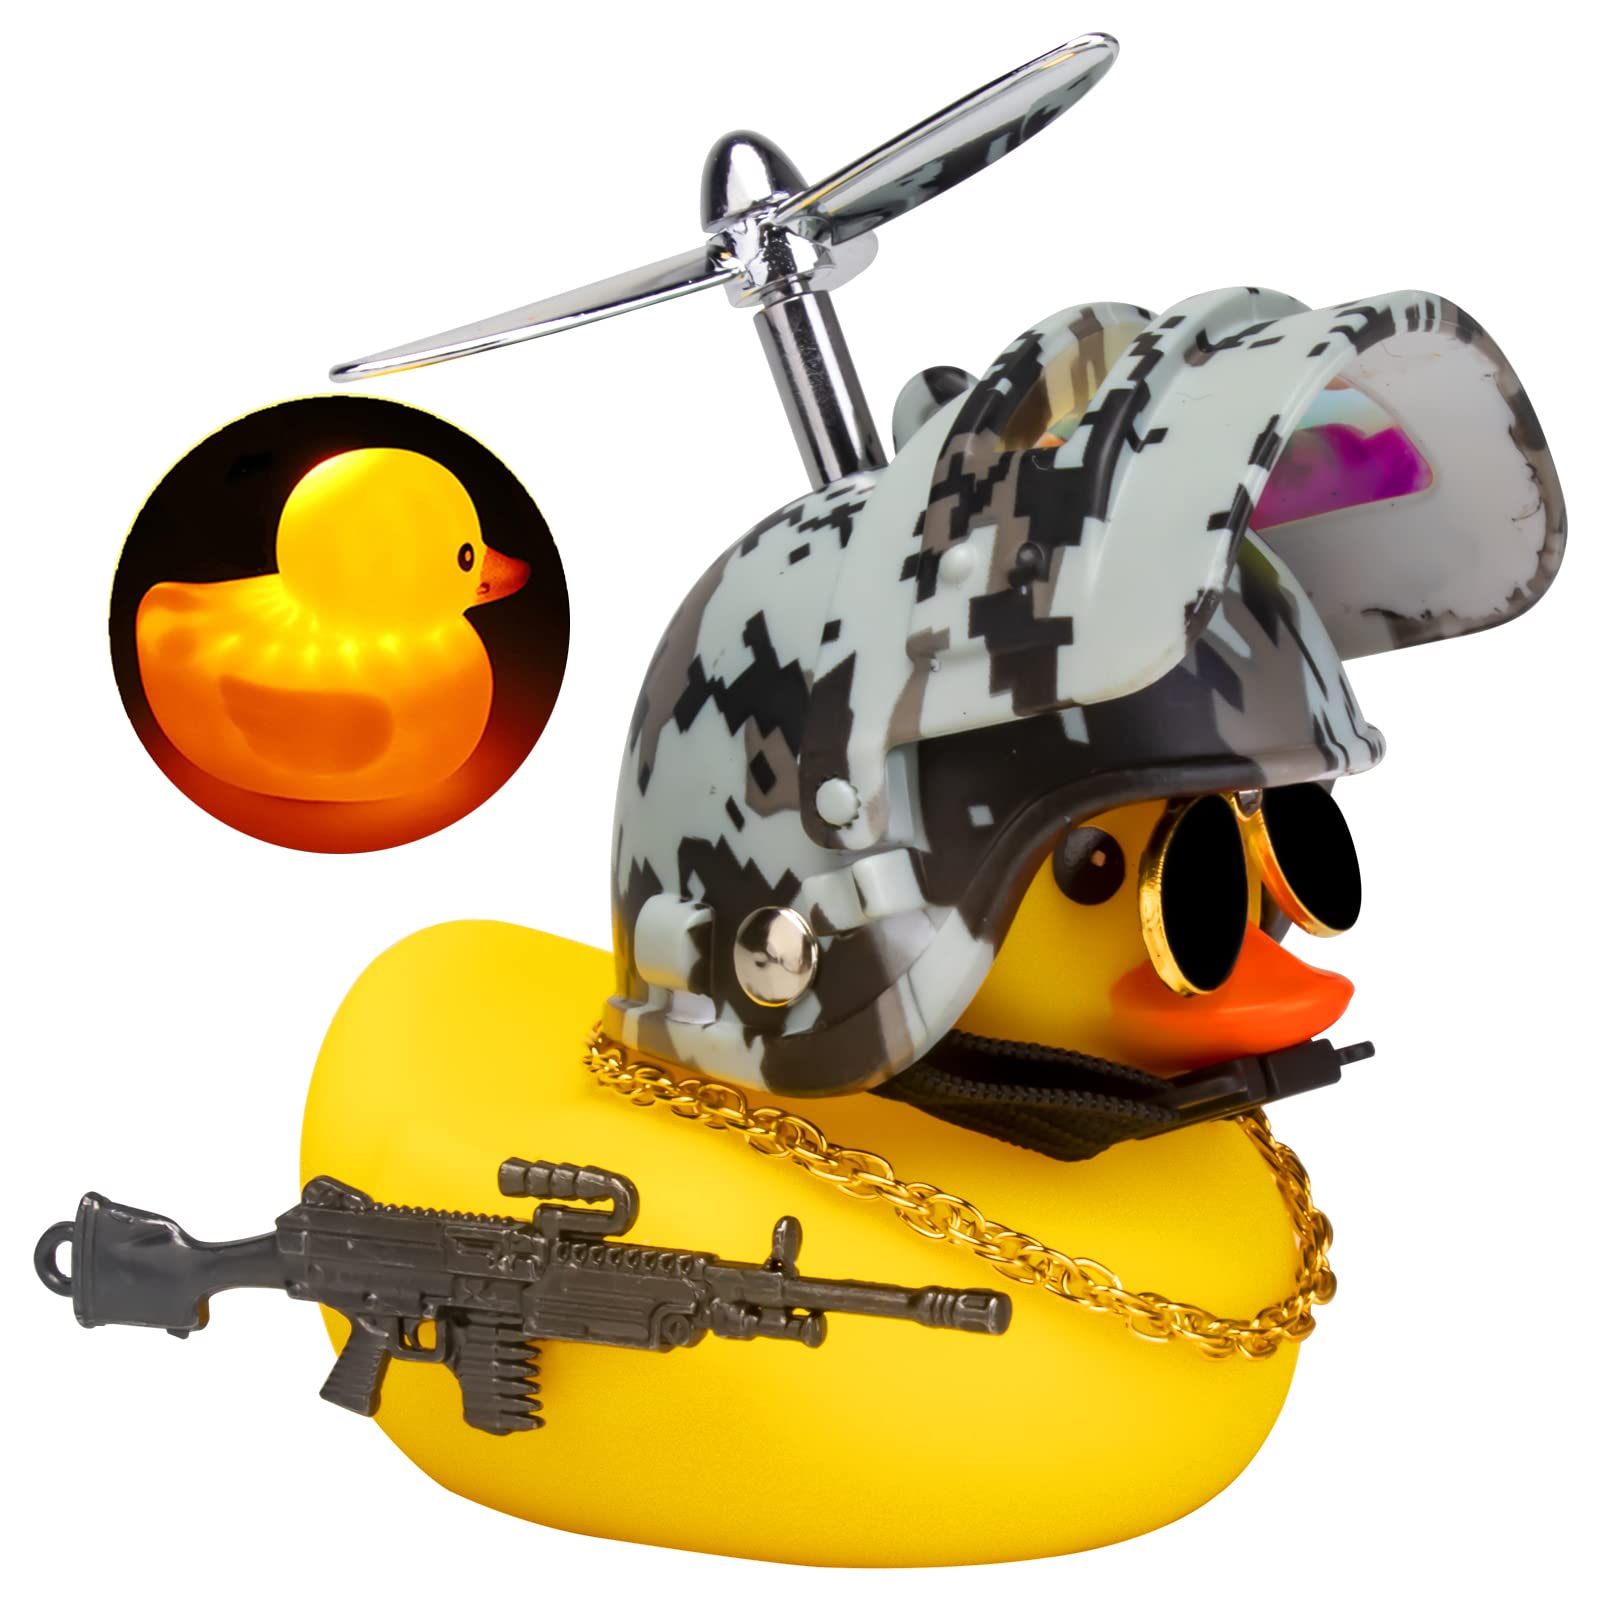 wonuu Pink Duck Car Dashboard Decorations Rubber Duck Car Ornaments Cool  Duck with Propeller Helmet Sunglasses Gold Chain